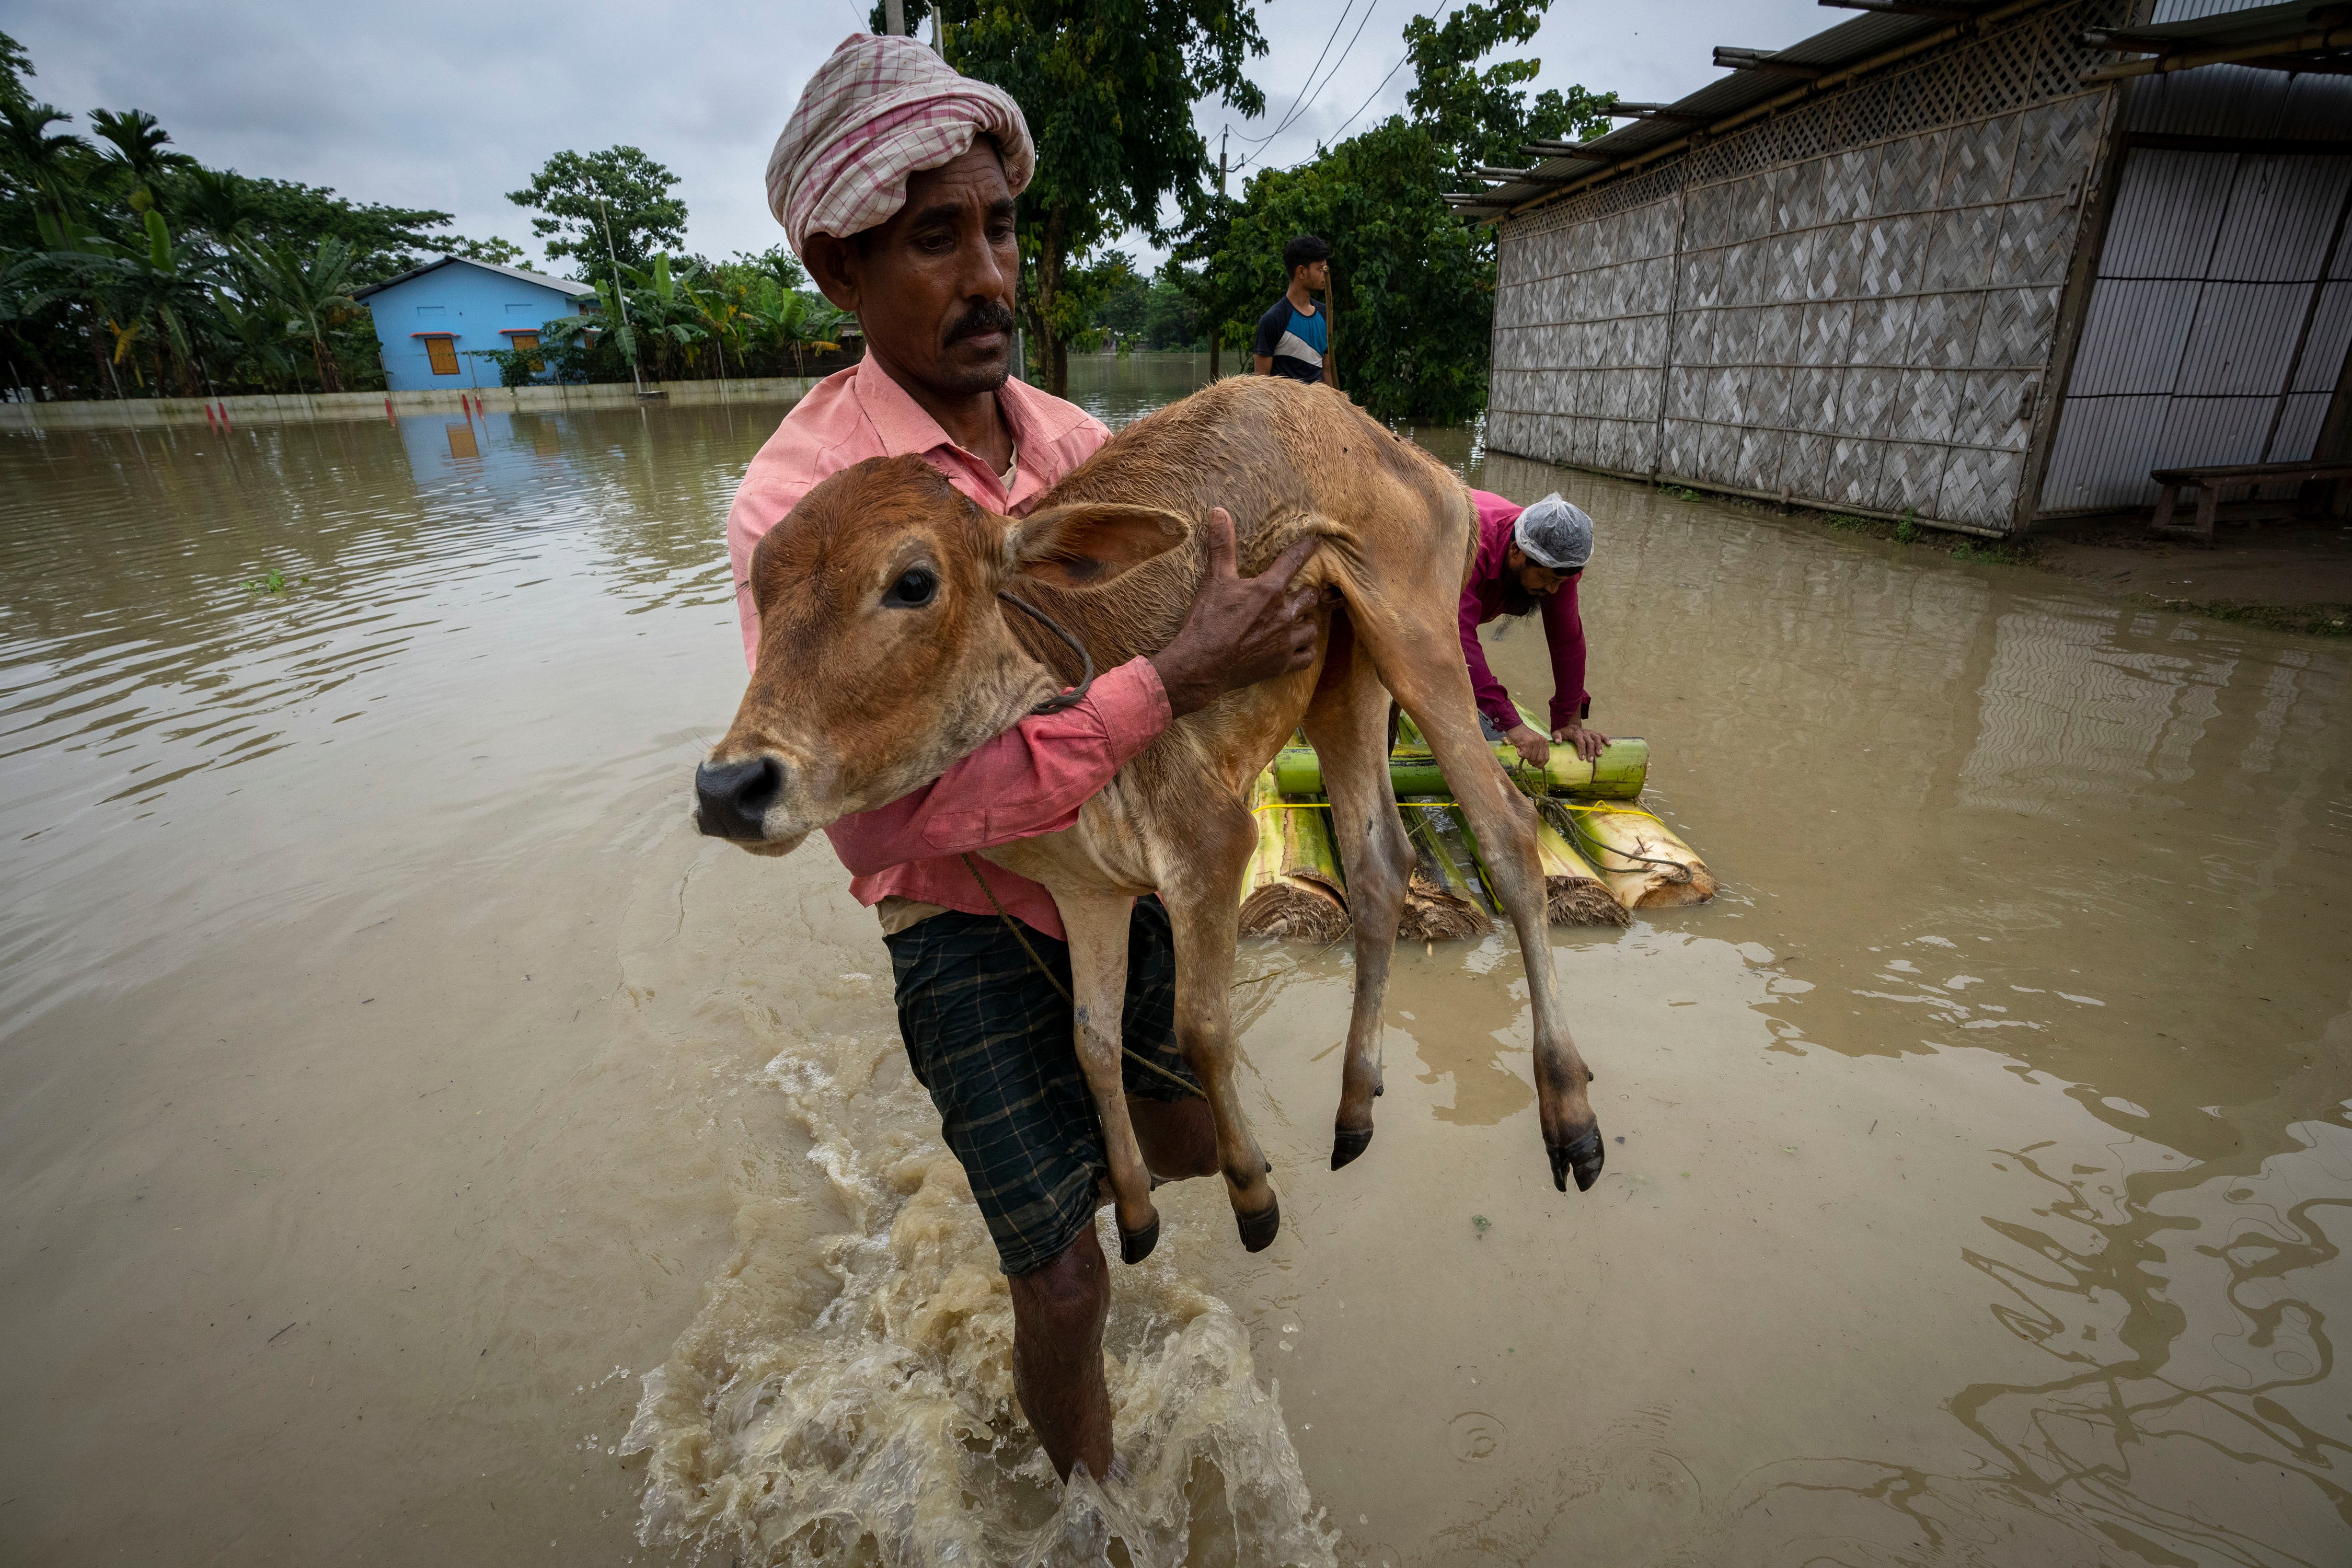 A villager carrying a calf wades through flood water in Korea village, west of Guwahati, on 17 June